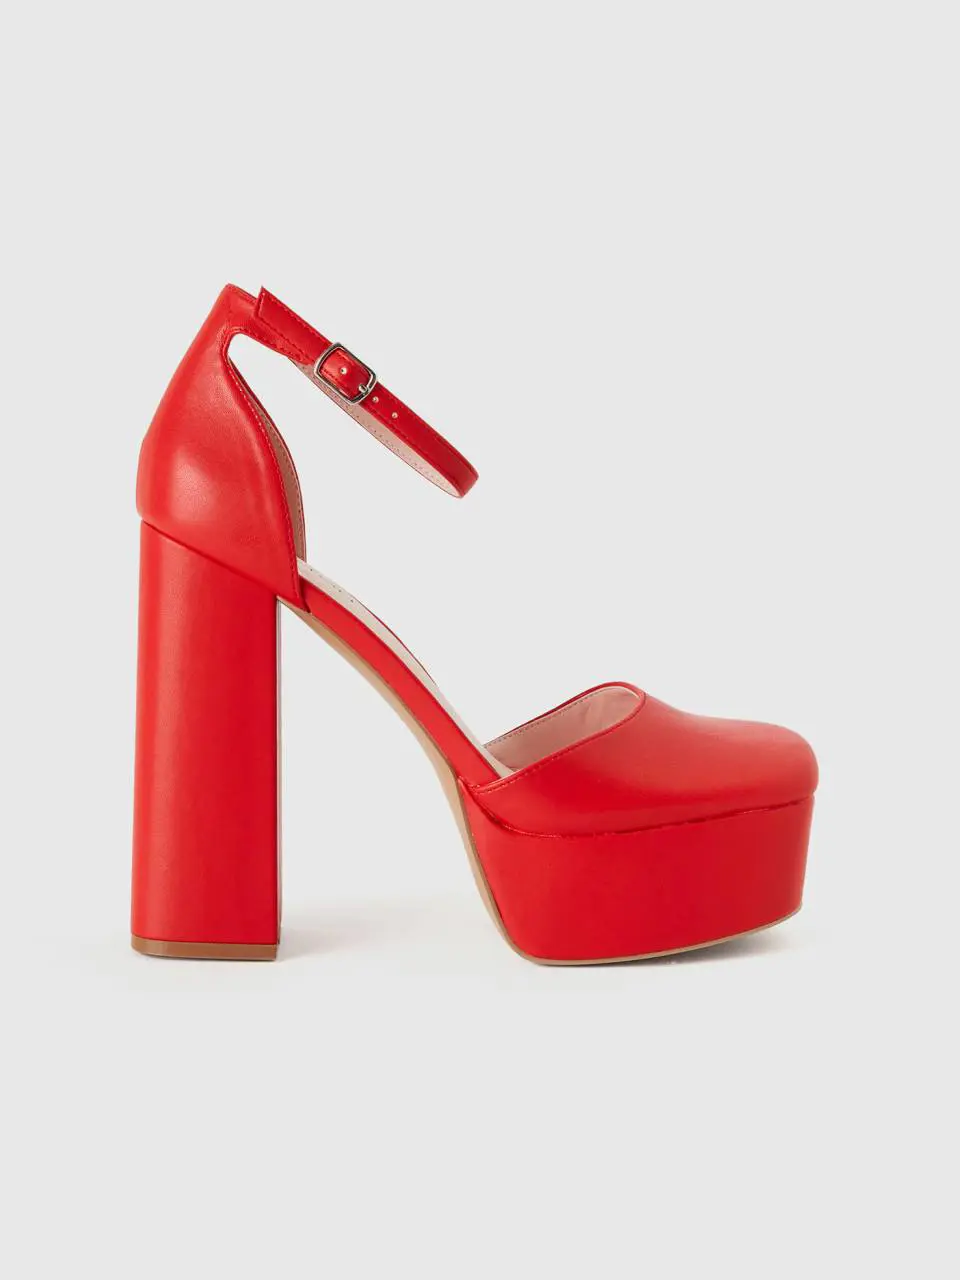 Benetton red sandals with heel and platform. 1